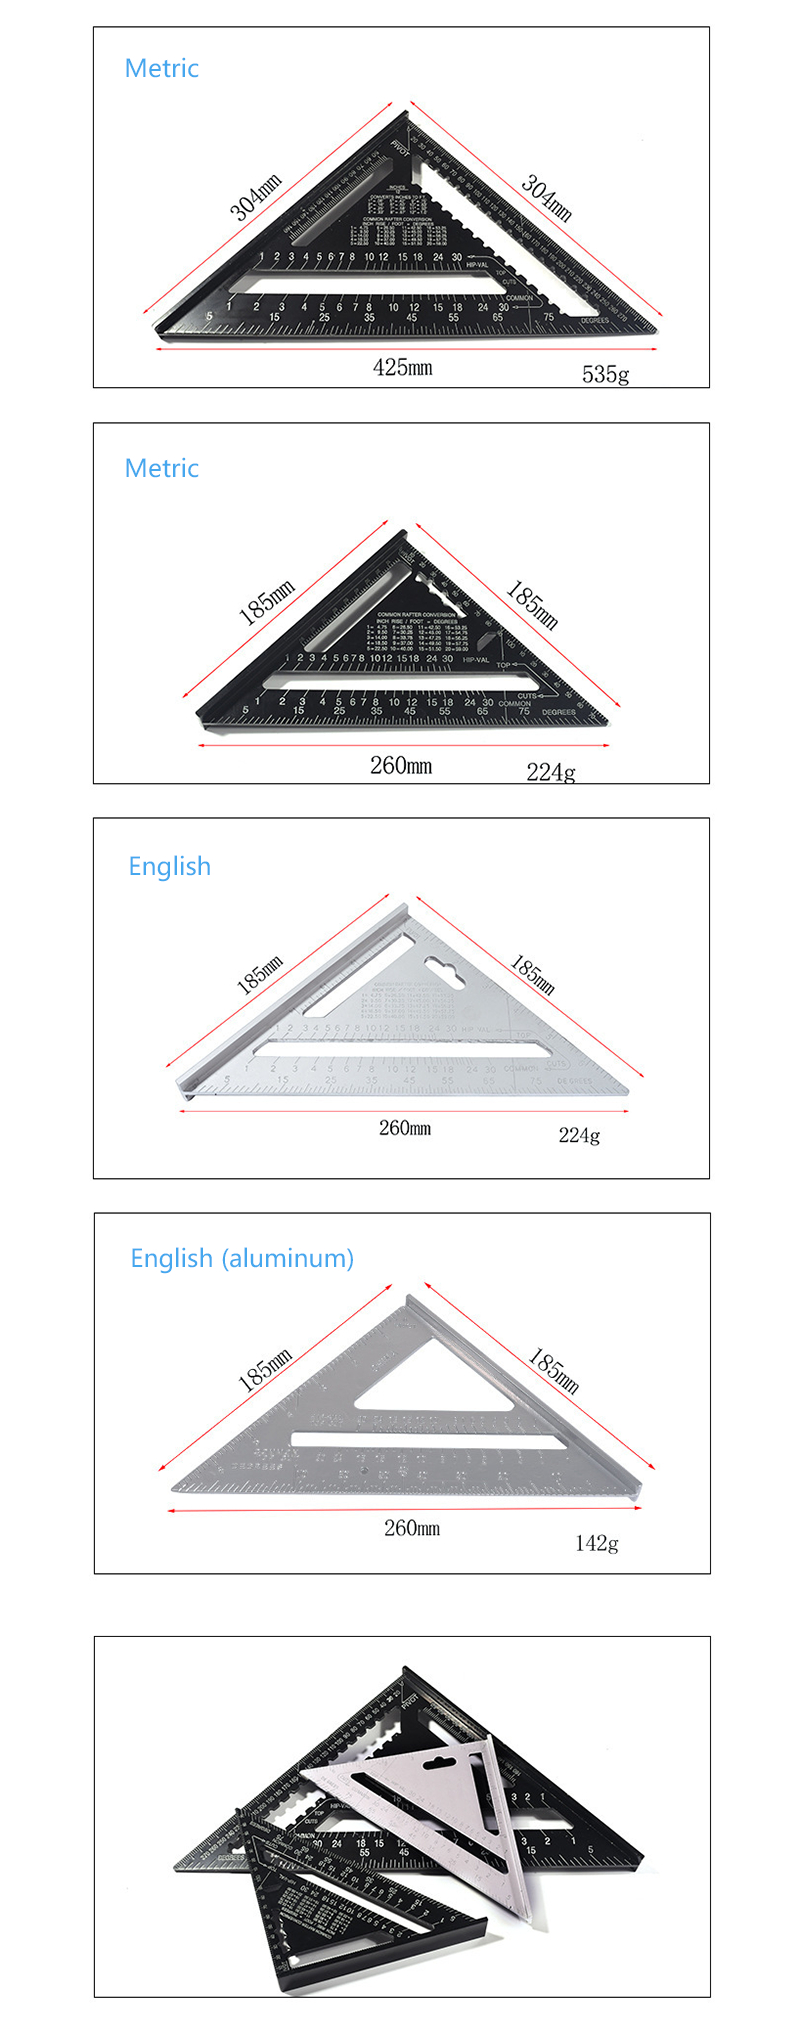 7-Inch-English-Triangle-Ruler-17CM-30CM-Metric-Triangle-Ruler-Angle-Protractor-Metal-Speed-Square-Me-1474107-1